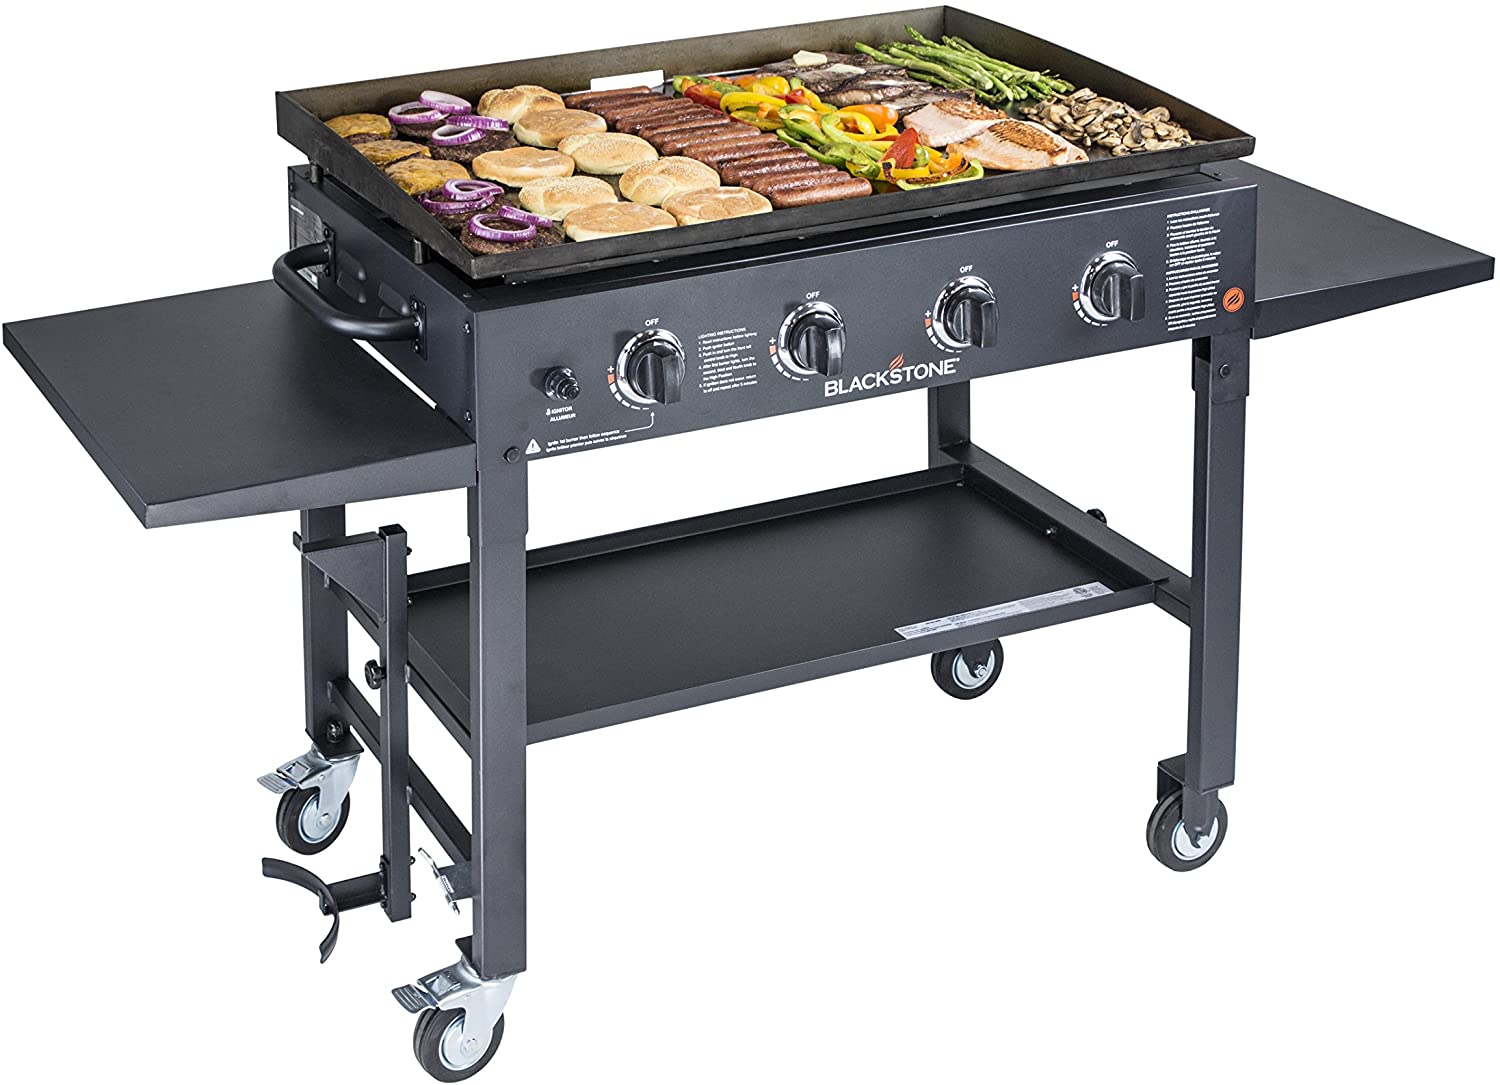 Blackstone Griddle vs Weber Grill-Which is Better and Why? - University  Grill